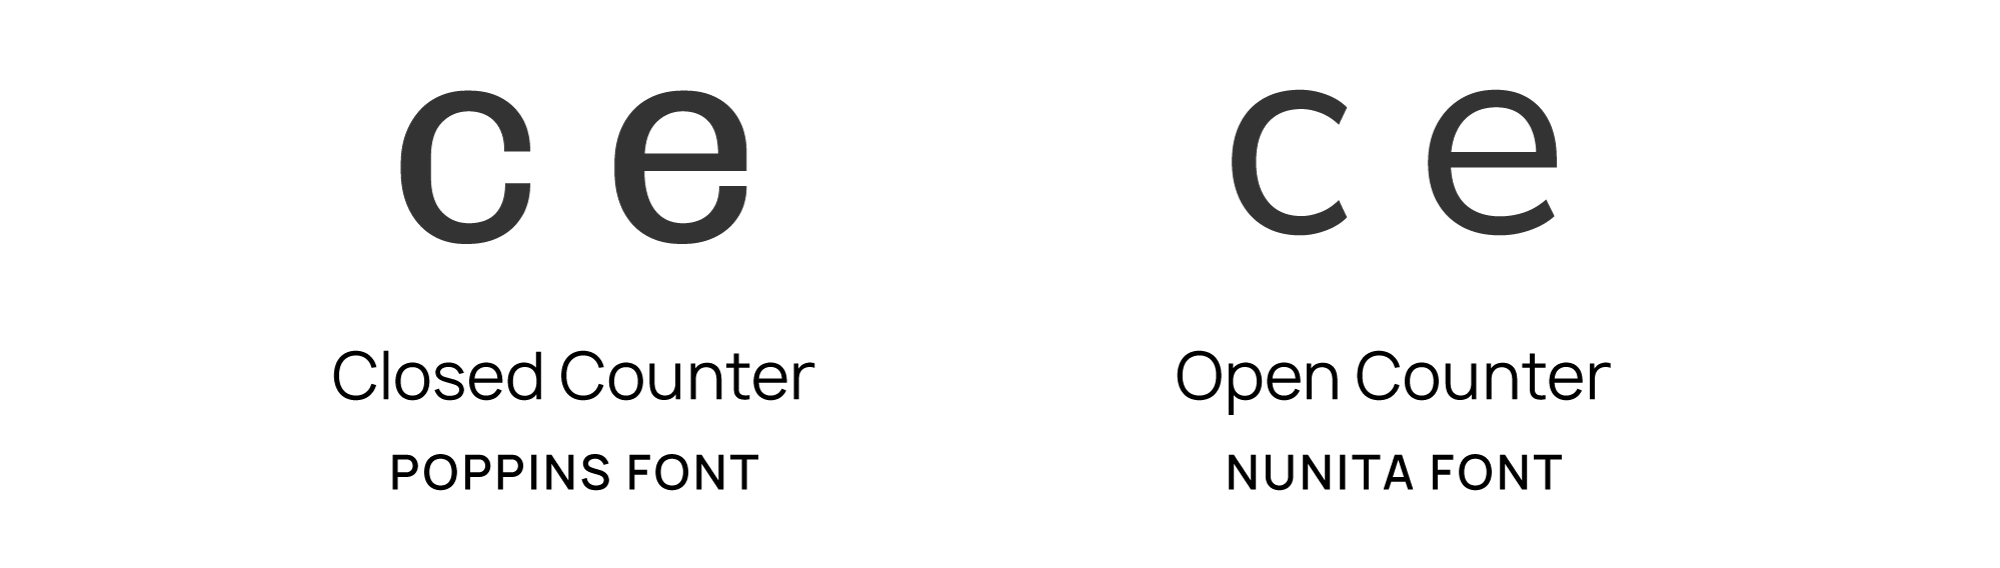 The letters "c" and "e" are shown with closed counters for the Poppins font and open counters for the Nunita font.